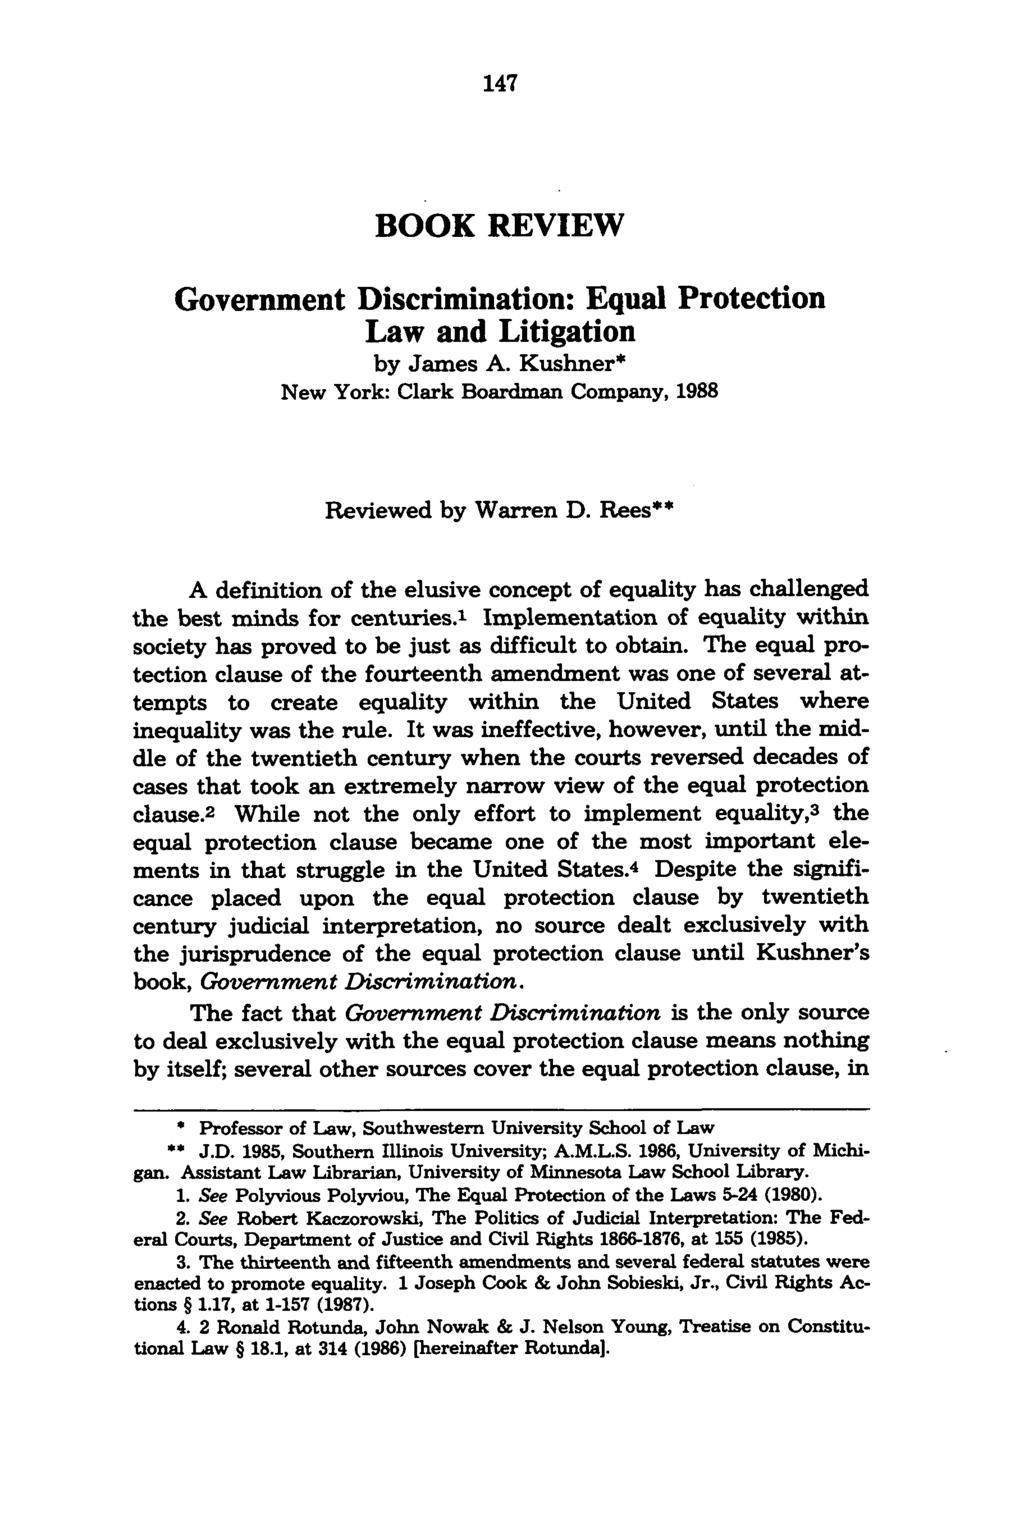 BOOK REVIEW Government Discrimination: Equal Protection Law and Litigation by James A. Kushner* New York: Clark Boardman Company, 1988 Reviewed by Warren D.